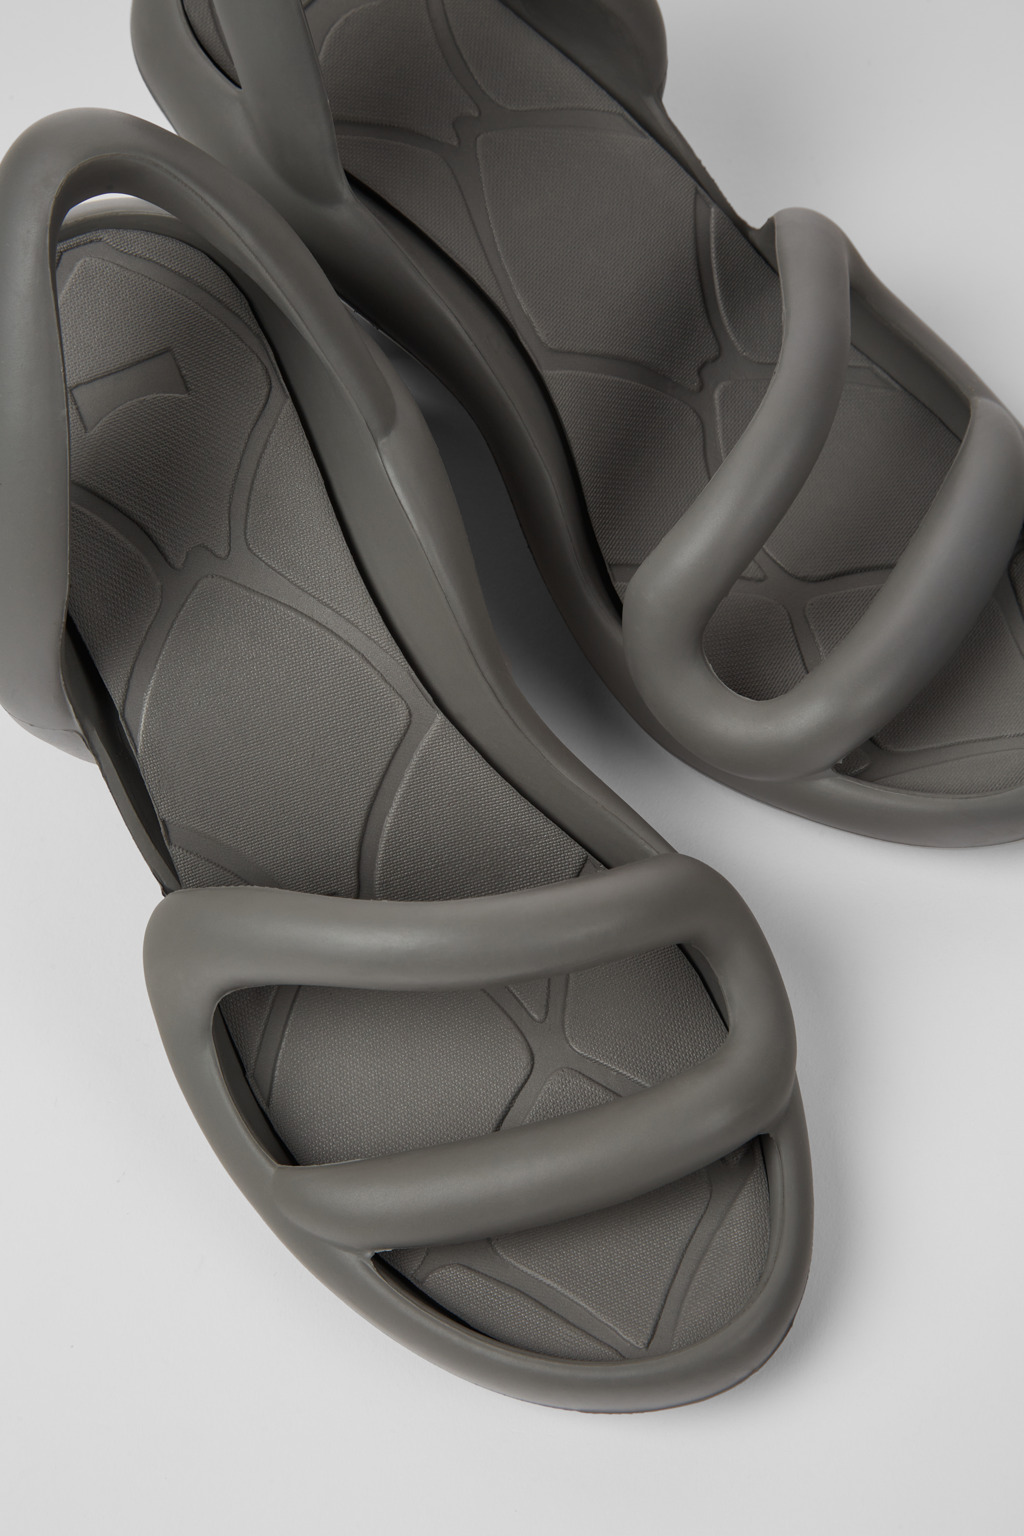 Kobarah Grey Sandals for Women - Fall/Winter collection - Camper 